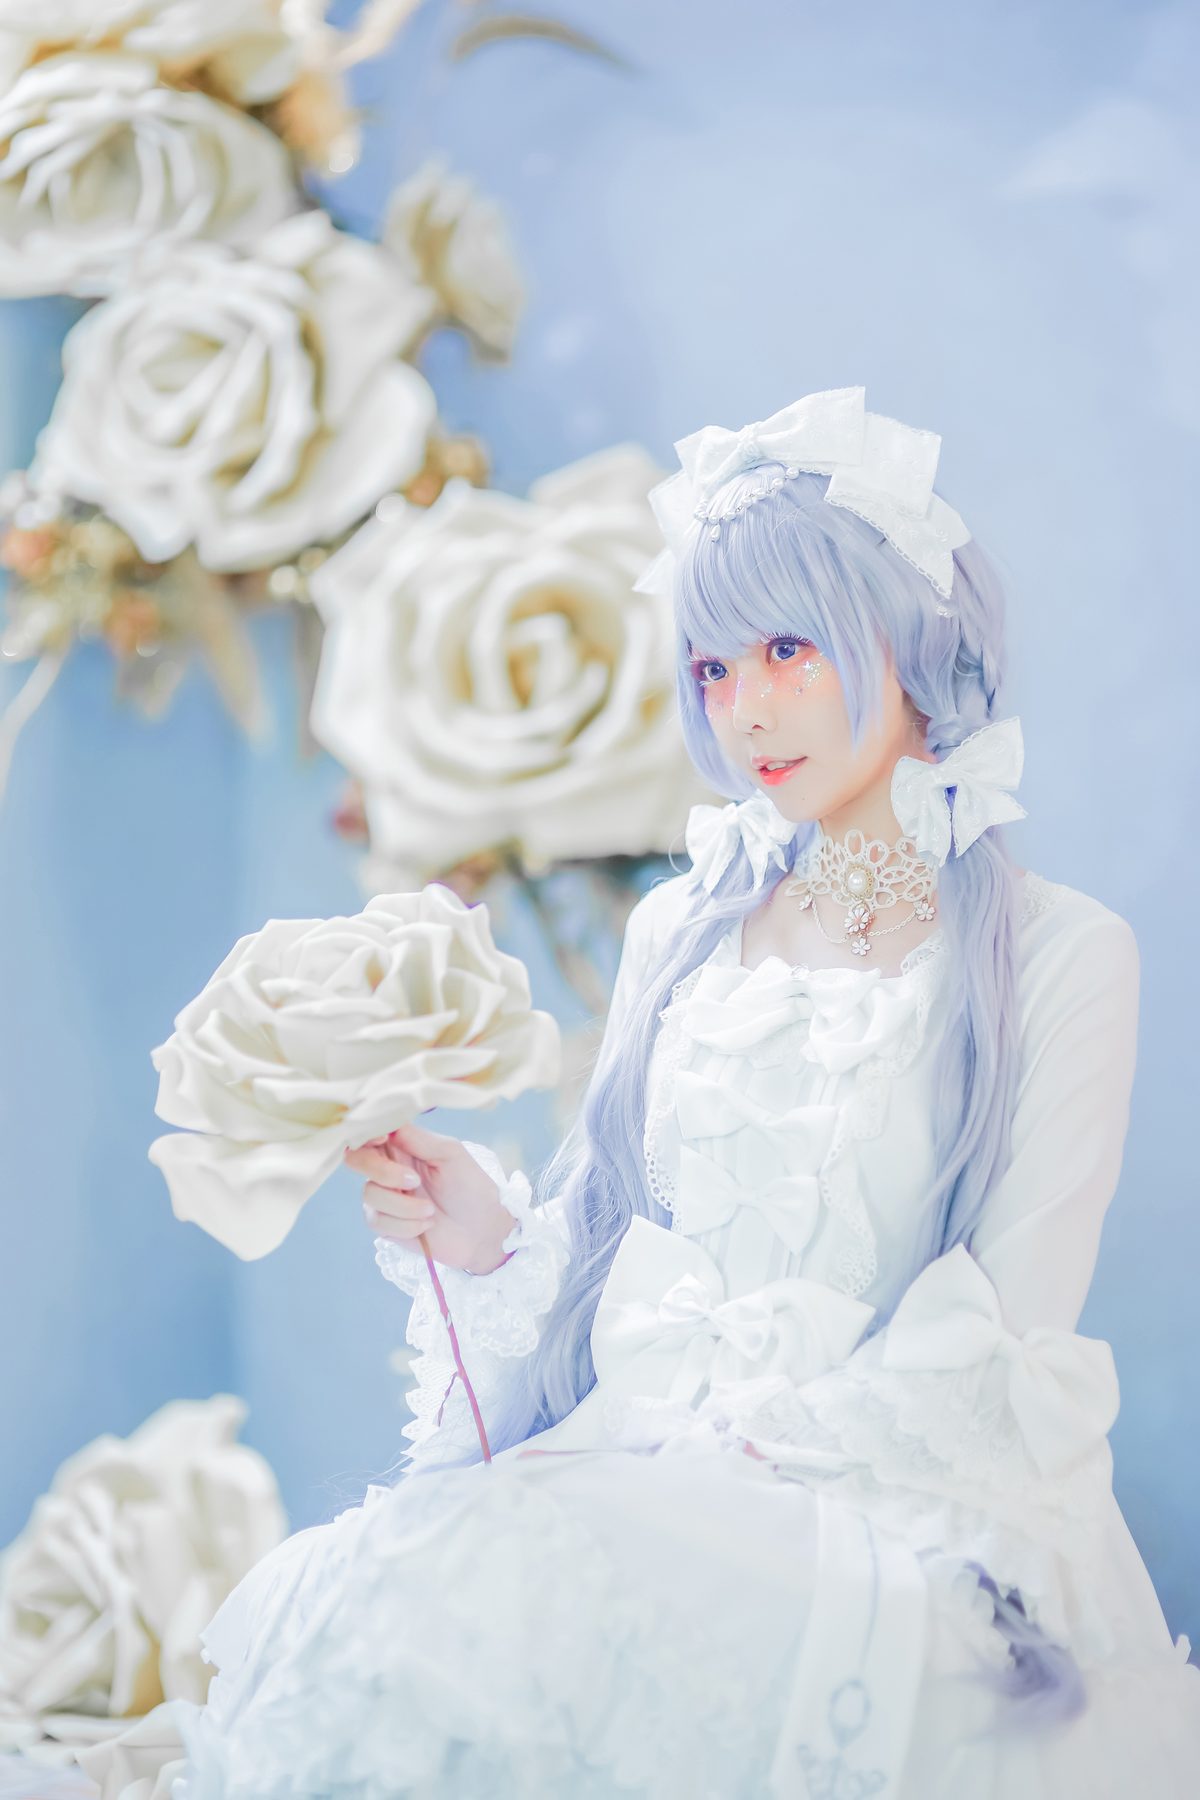 Coser@Ely_eee ElyEE子 TUESDAY TWINTAIL A 0069 8622380895.jpg